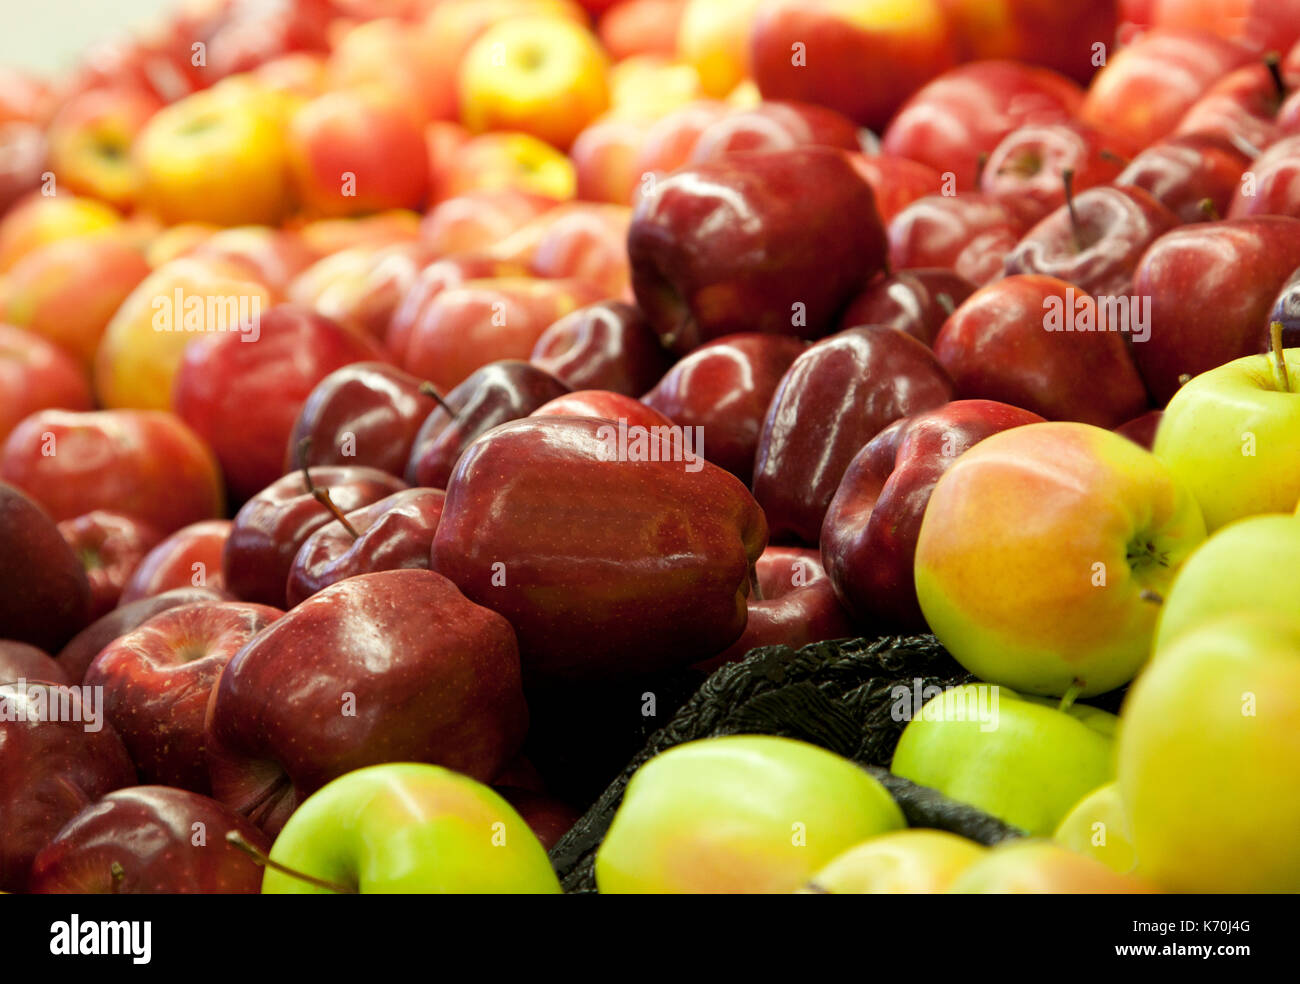 focus on beautiful fresh red apples at a market stand Stock Photo